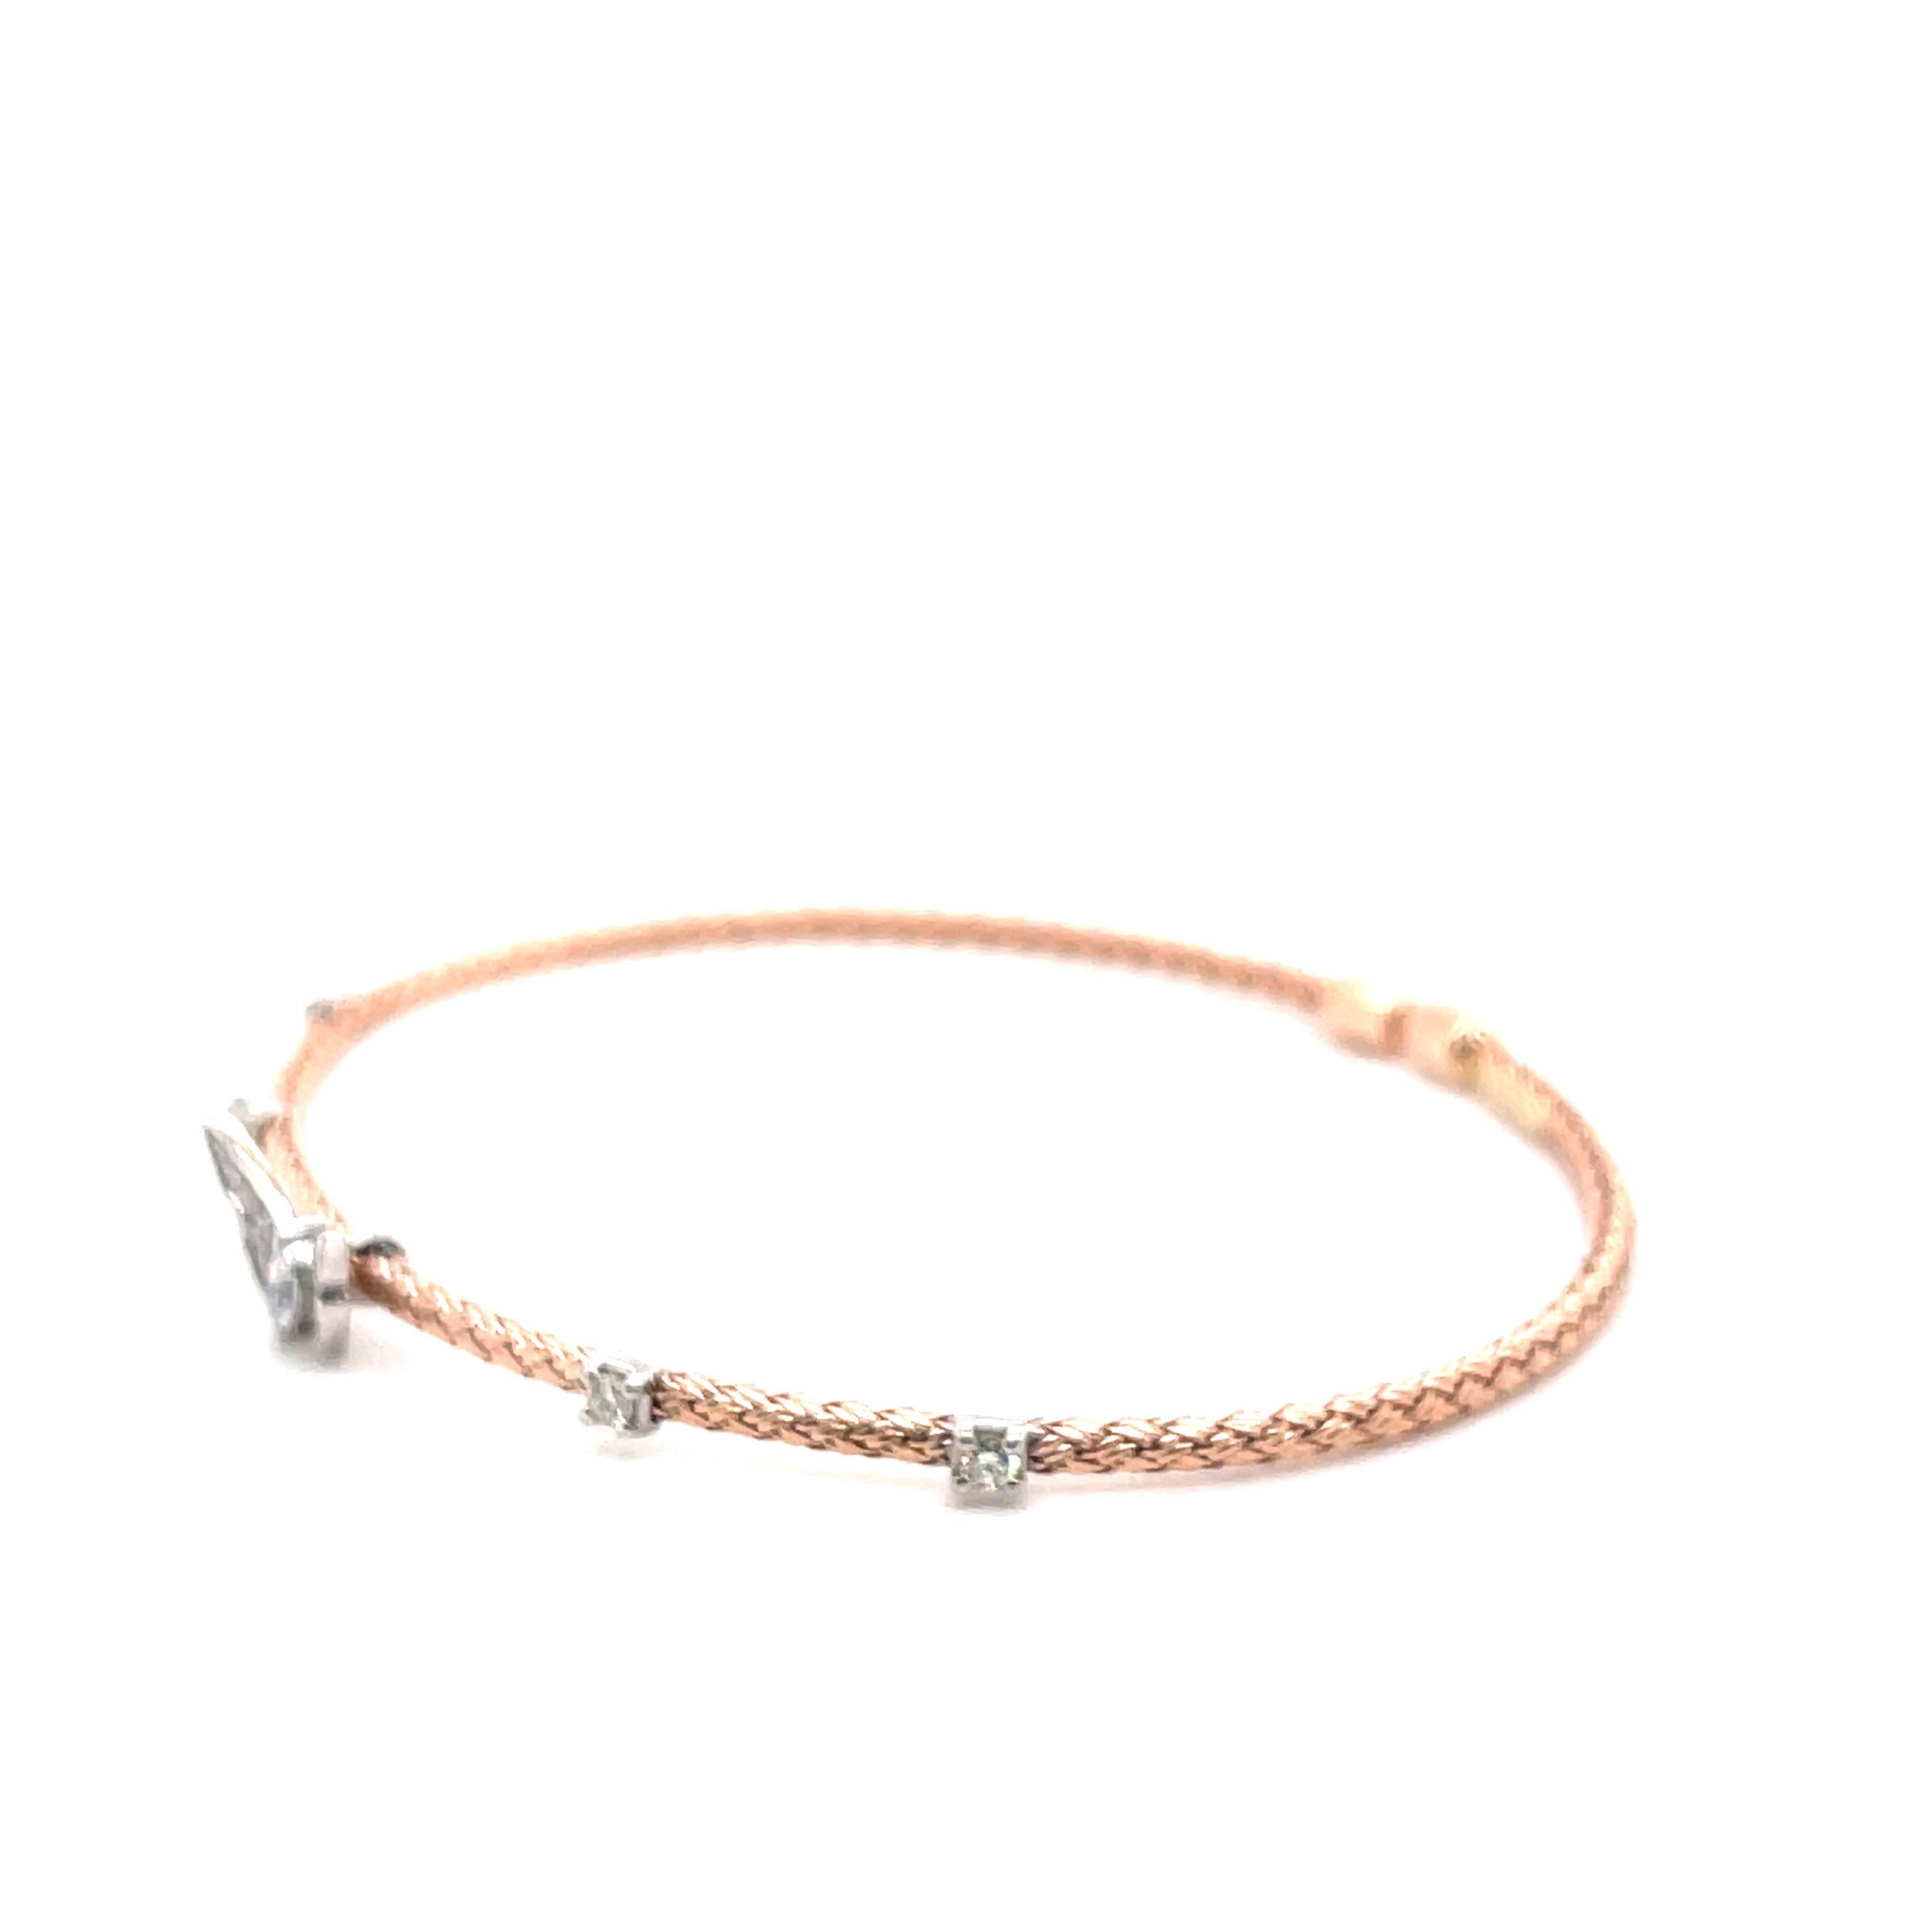 Marquise and round Diamonds 0.28 cts total weight
14K rose gold 
comes in white and yellow gold too
Perfect for stacking